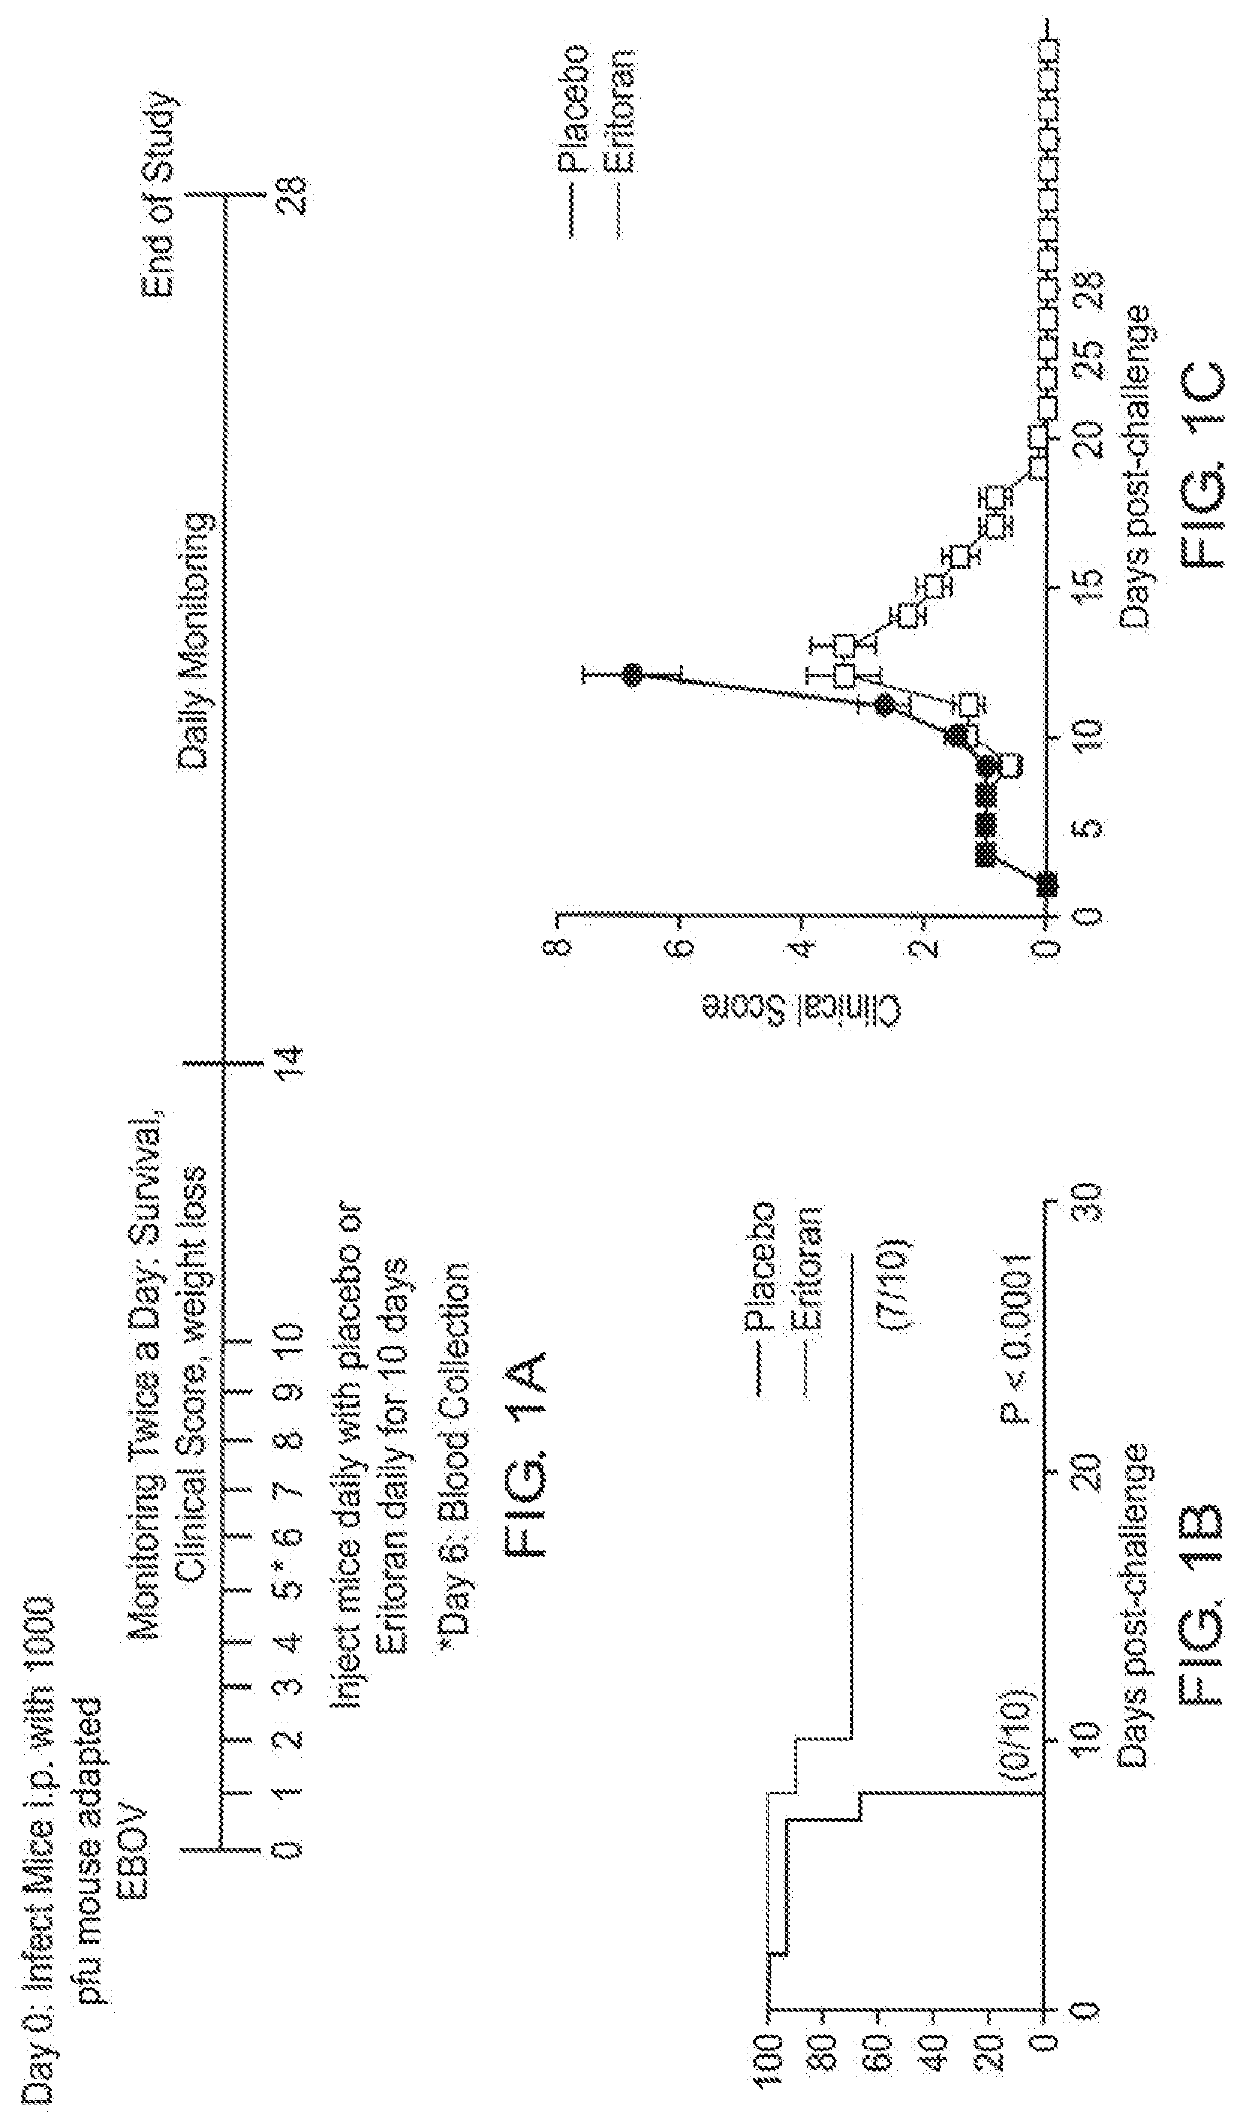 Method of use of eritoran as a TLR4 antagonist for treatment of ebola and Marburg disease